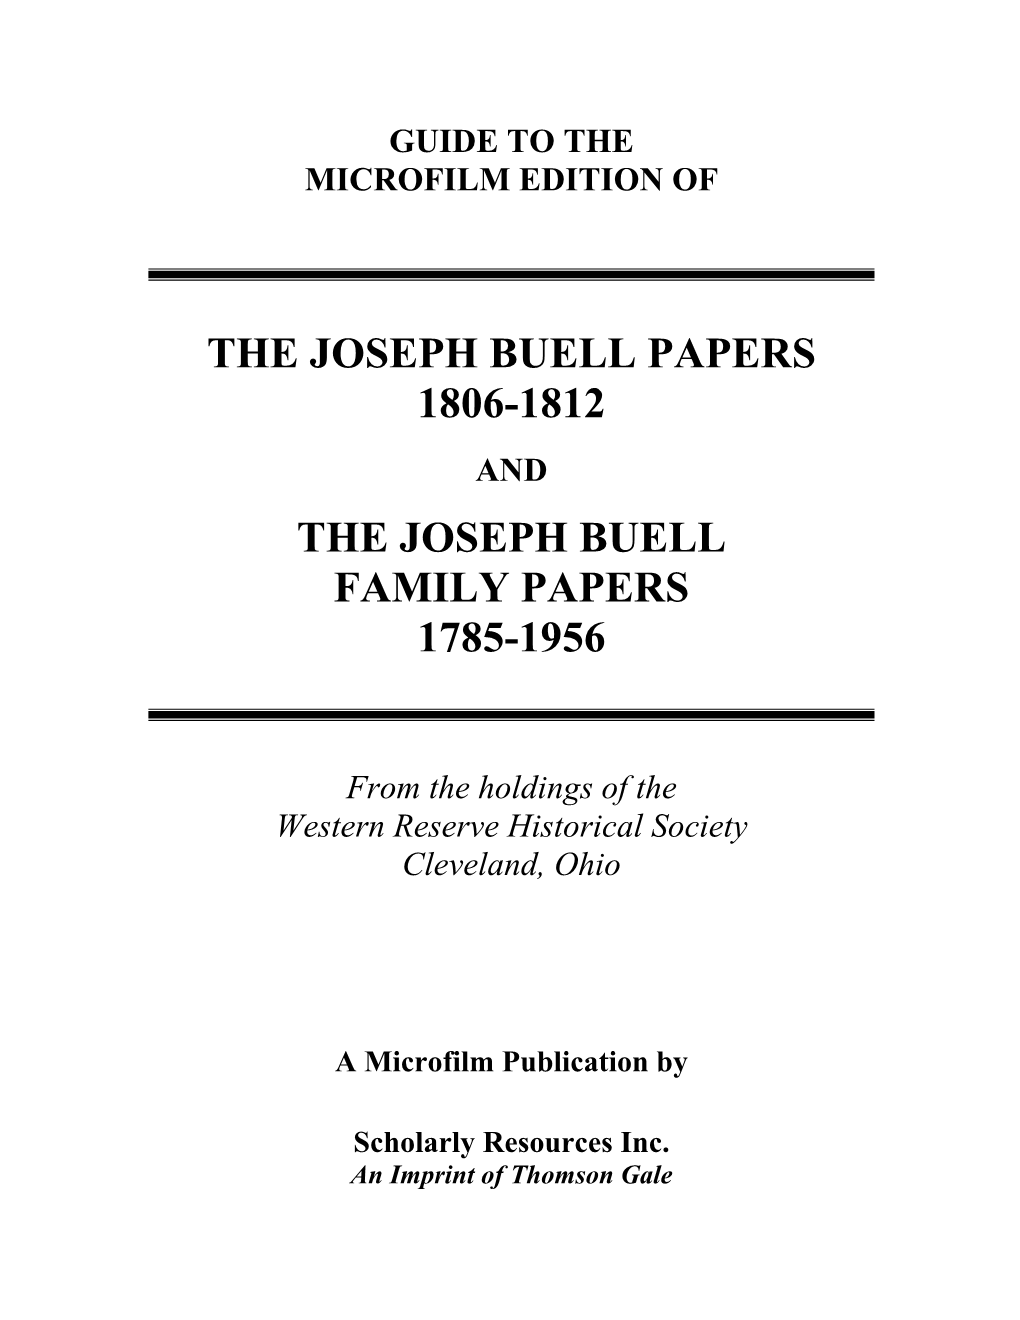 The Joseph Buell Papers 1806-1812 the Joseph Buell